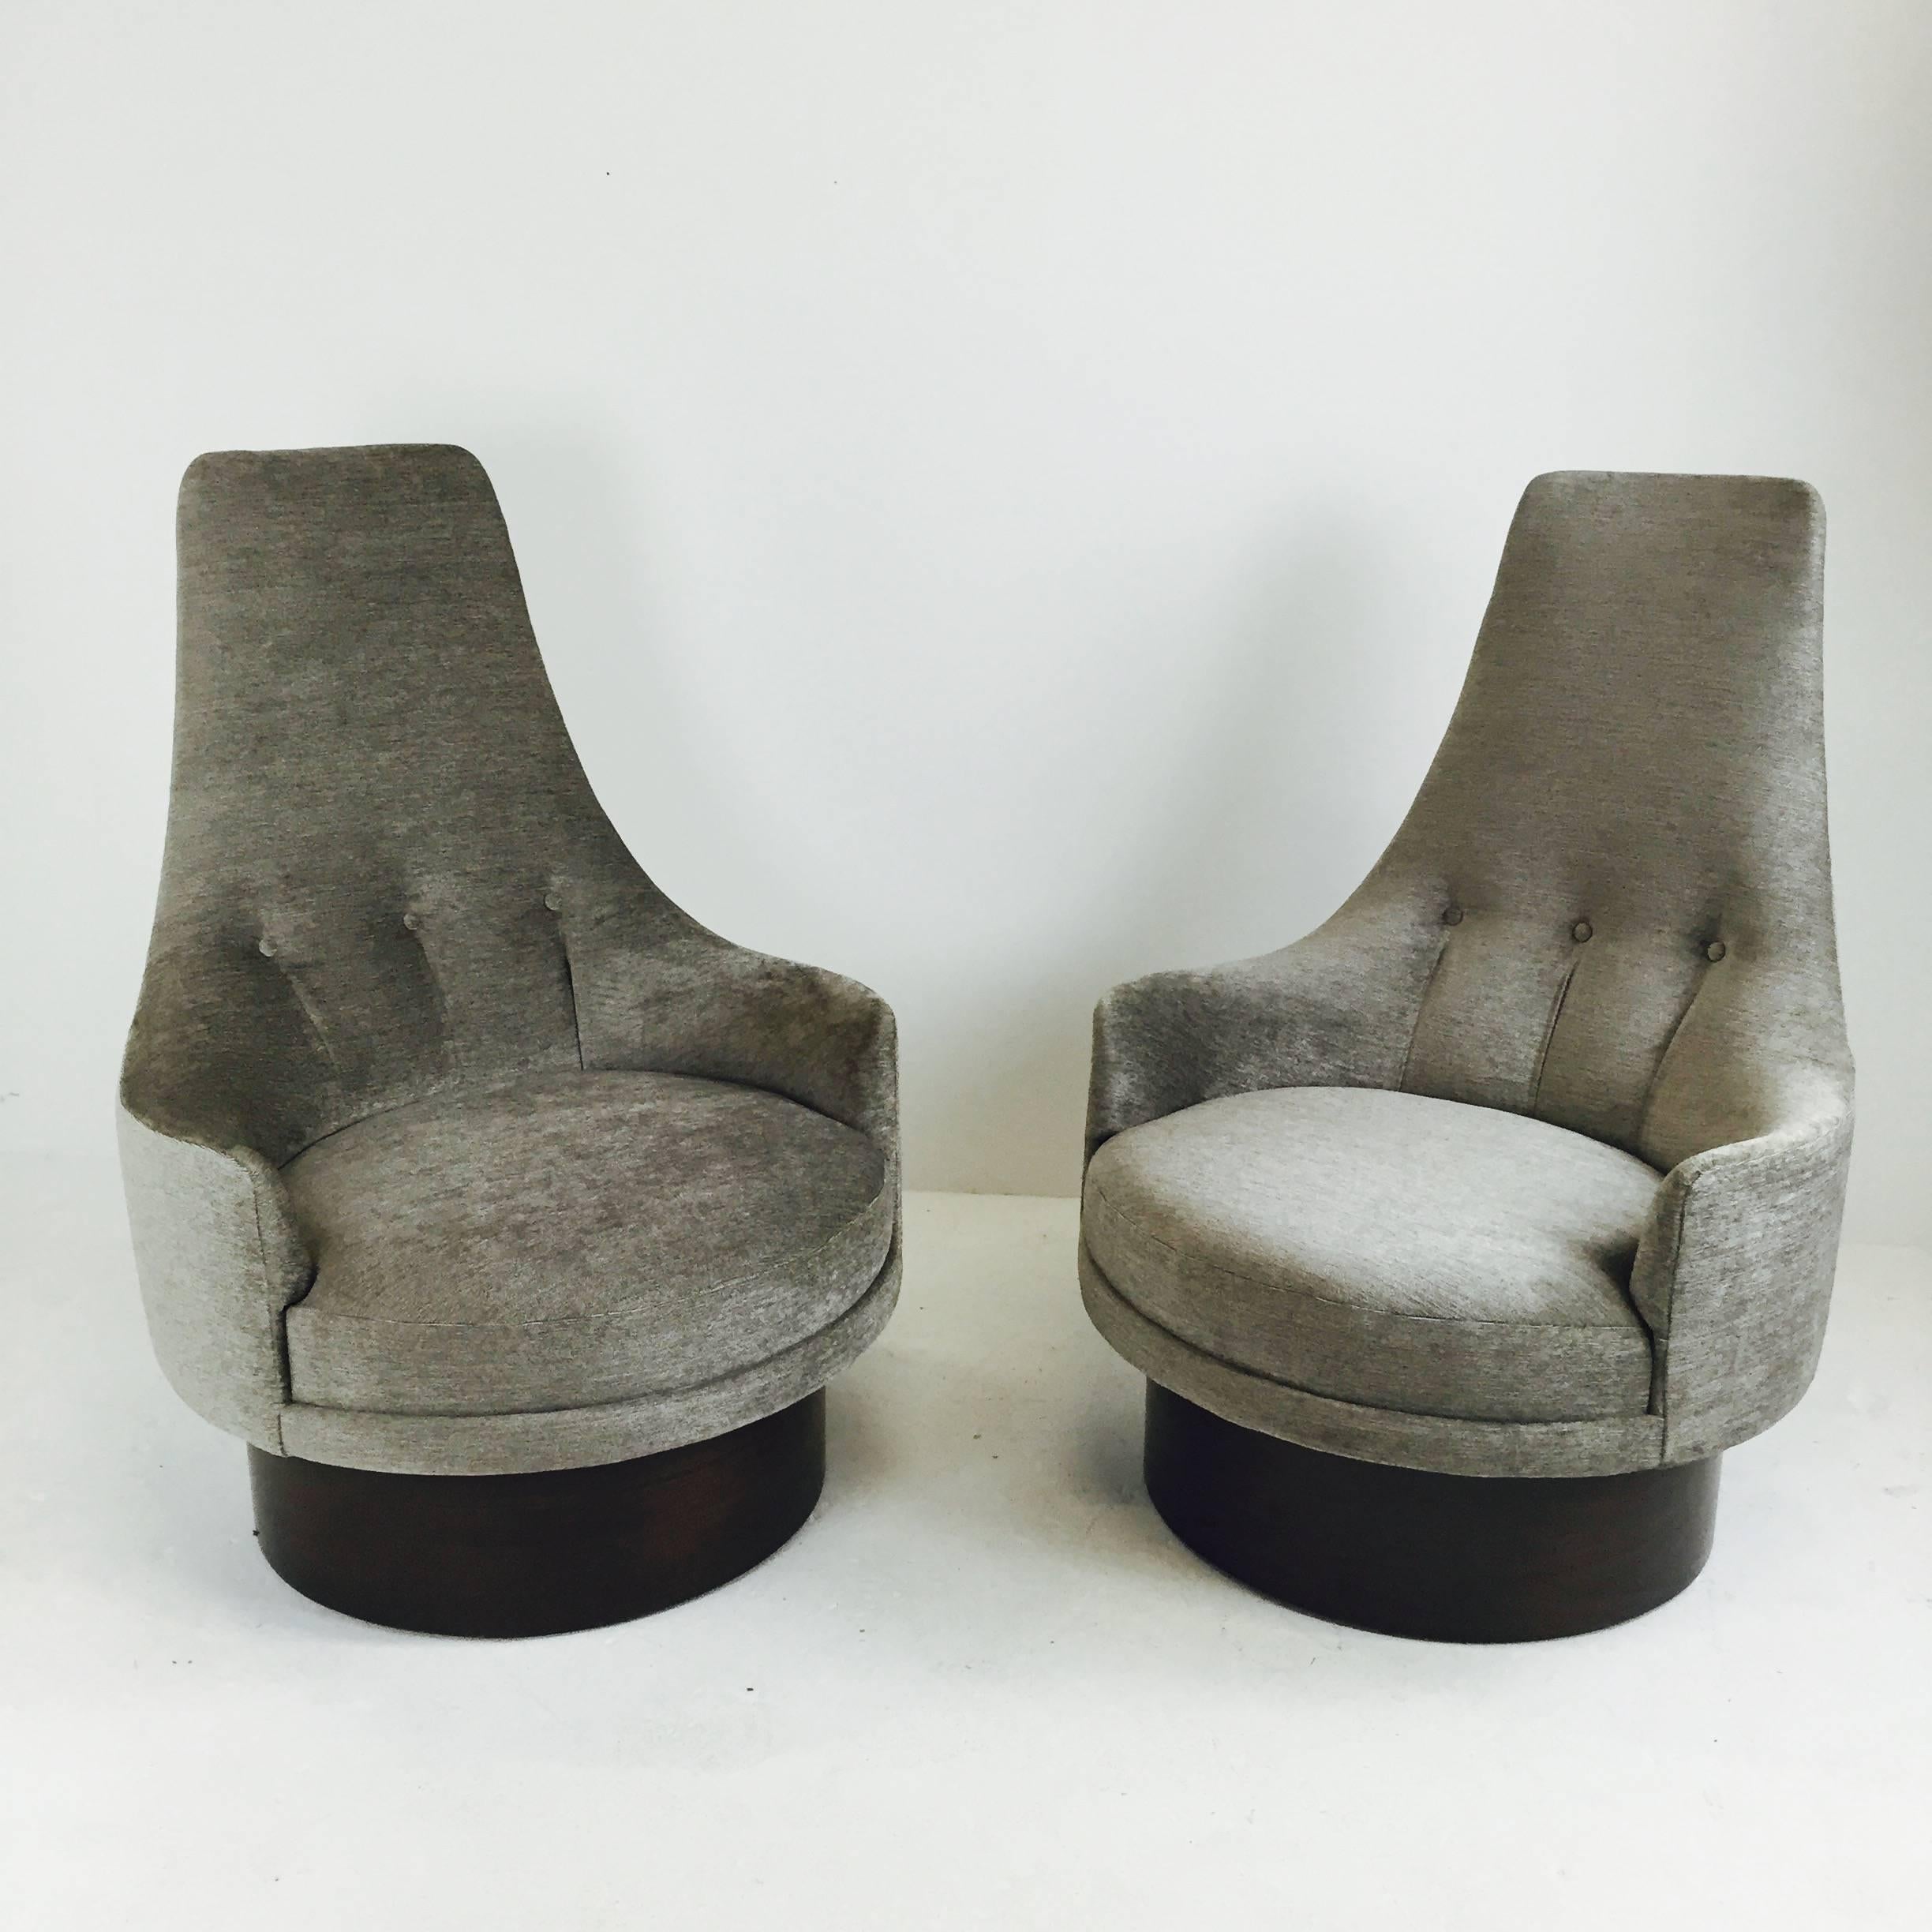 20th Century High back swivel chairs by Adrian Pearsall